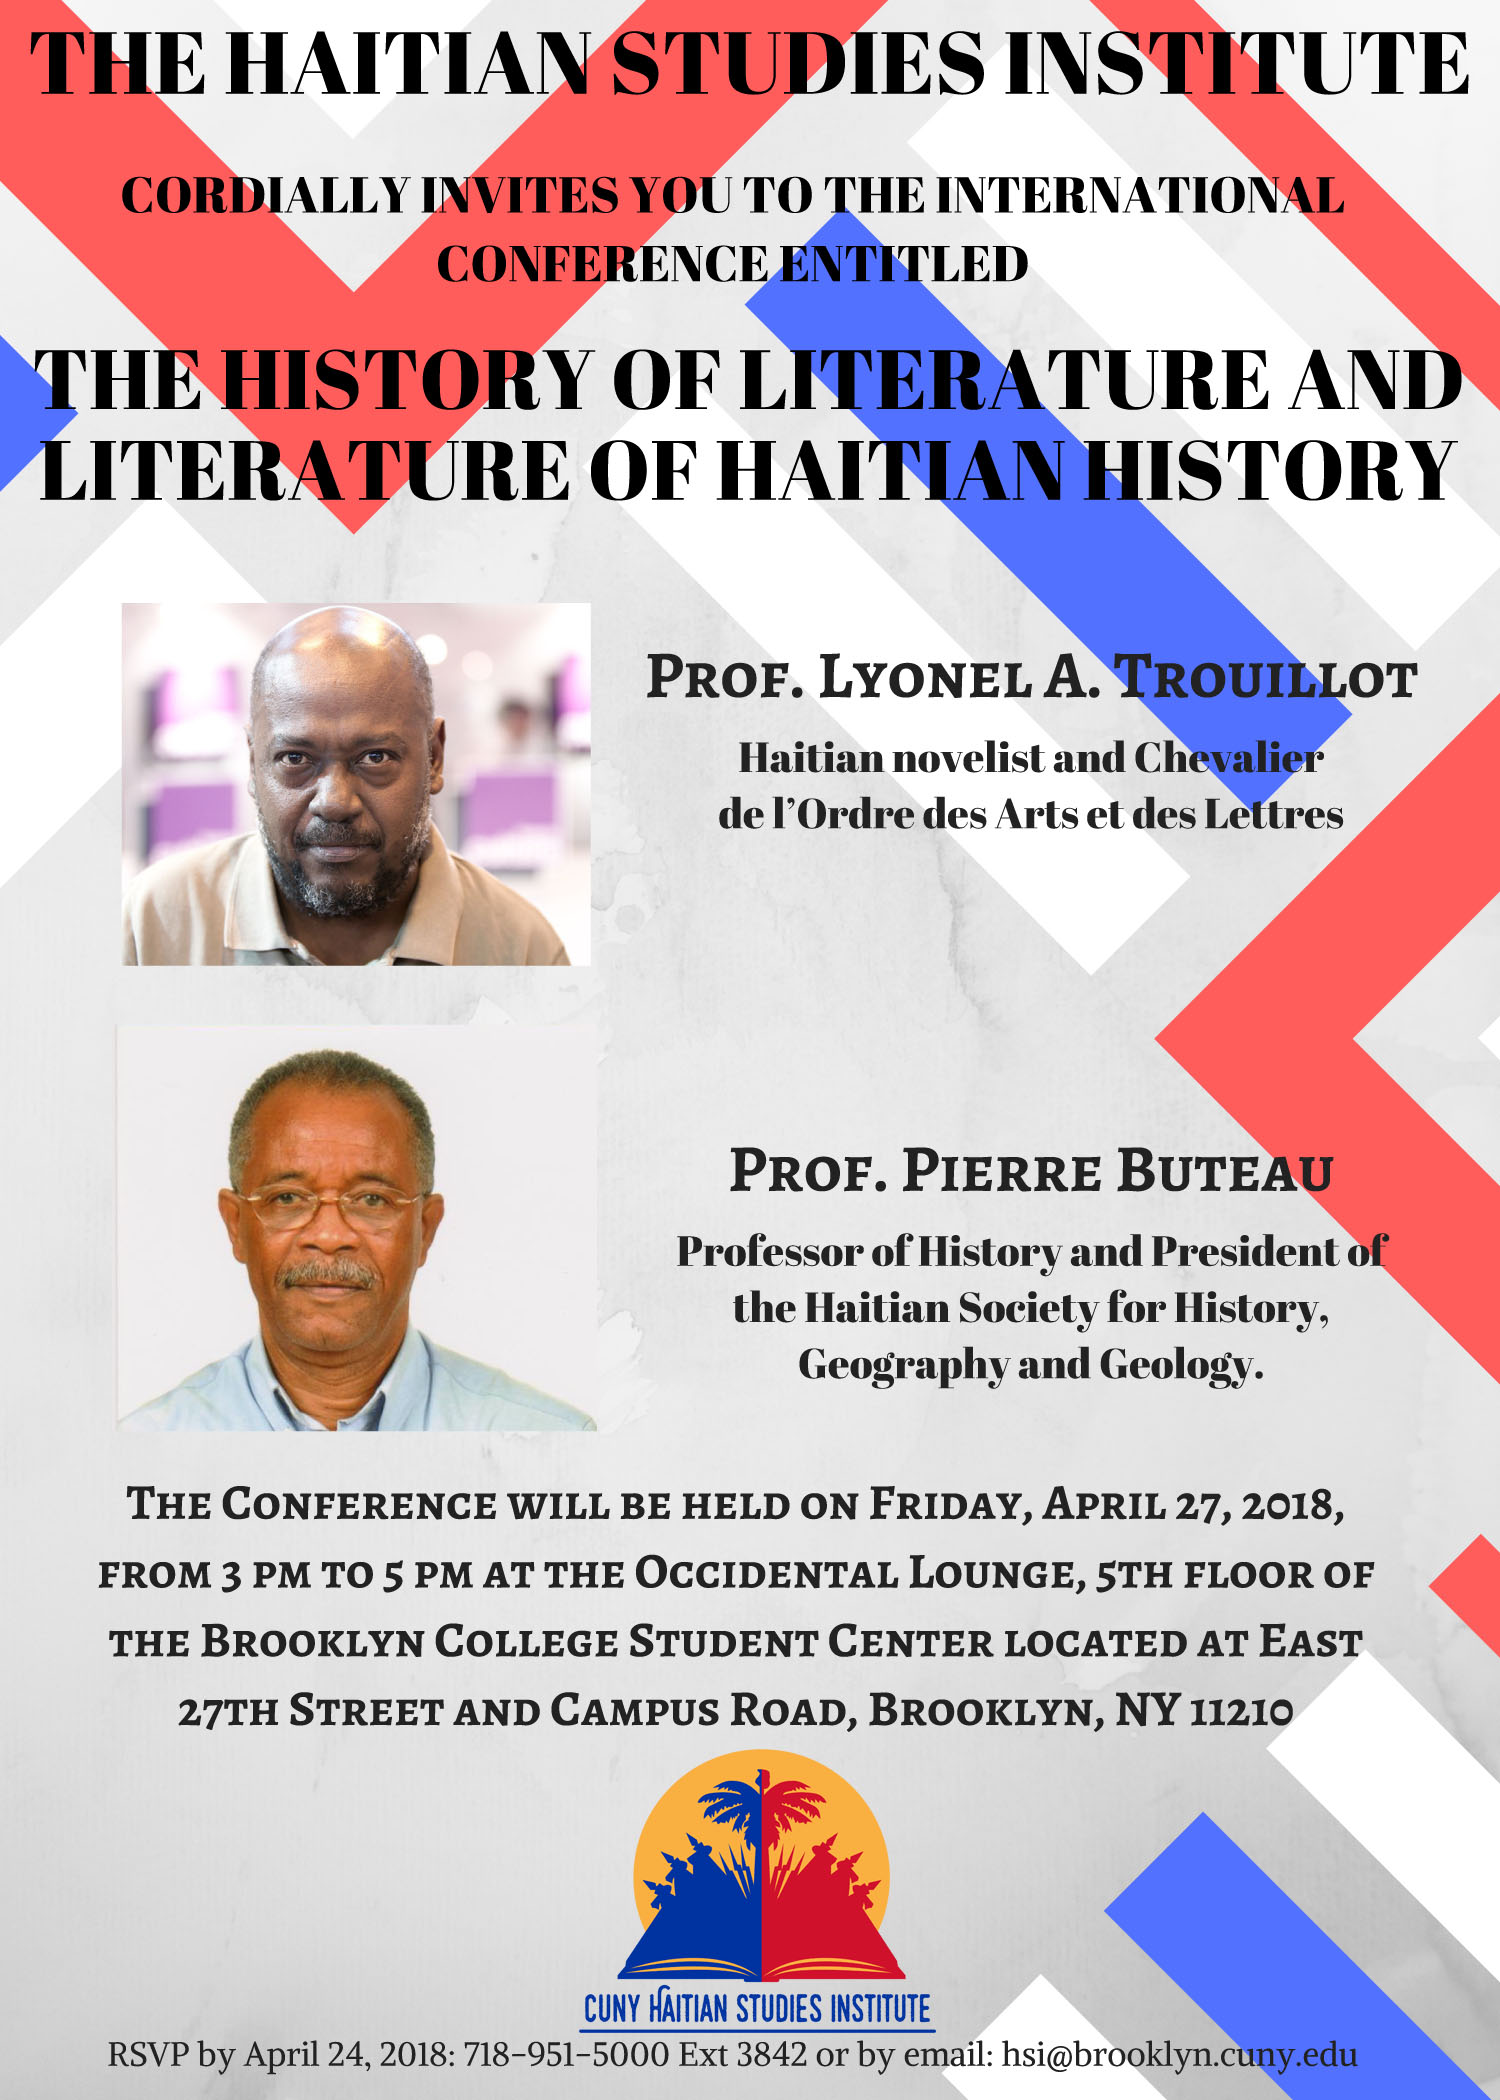  The History of Literature And Literature of Haitian History